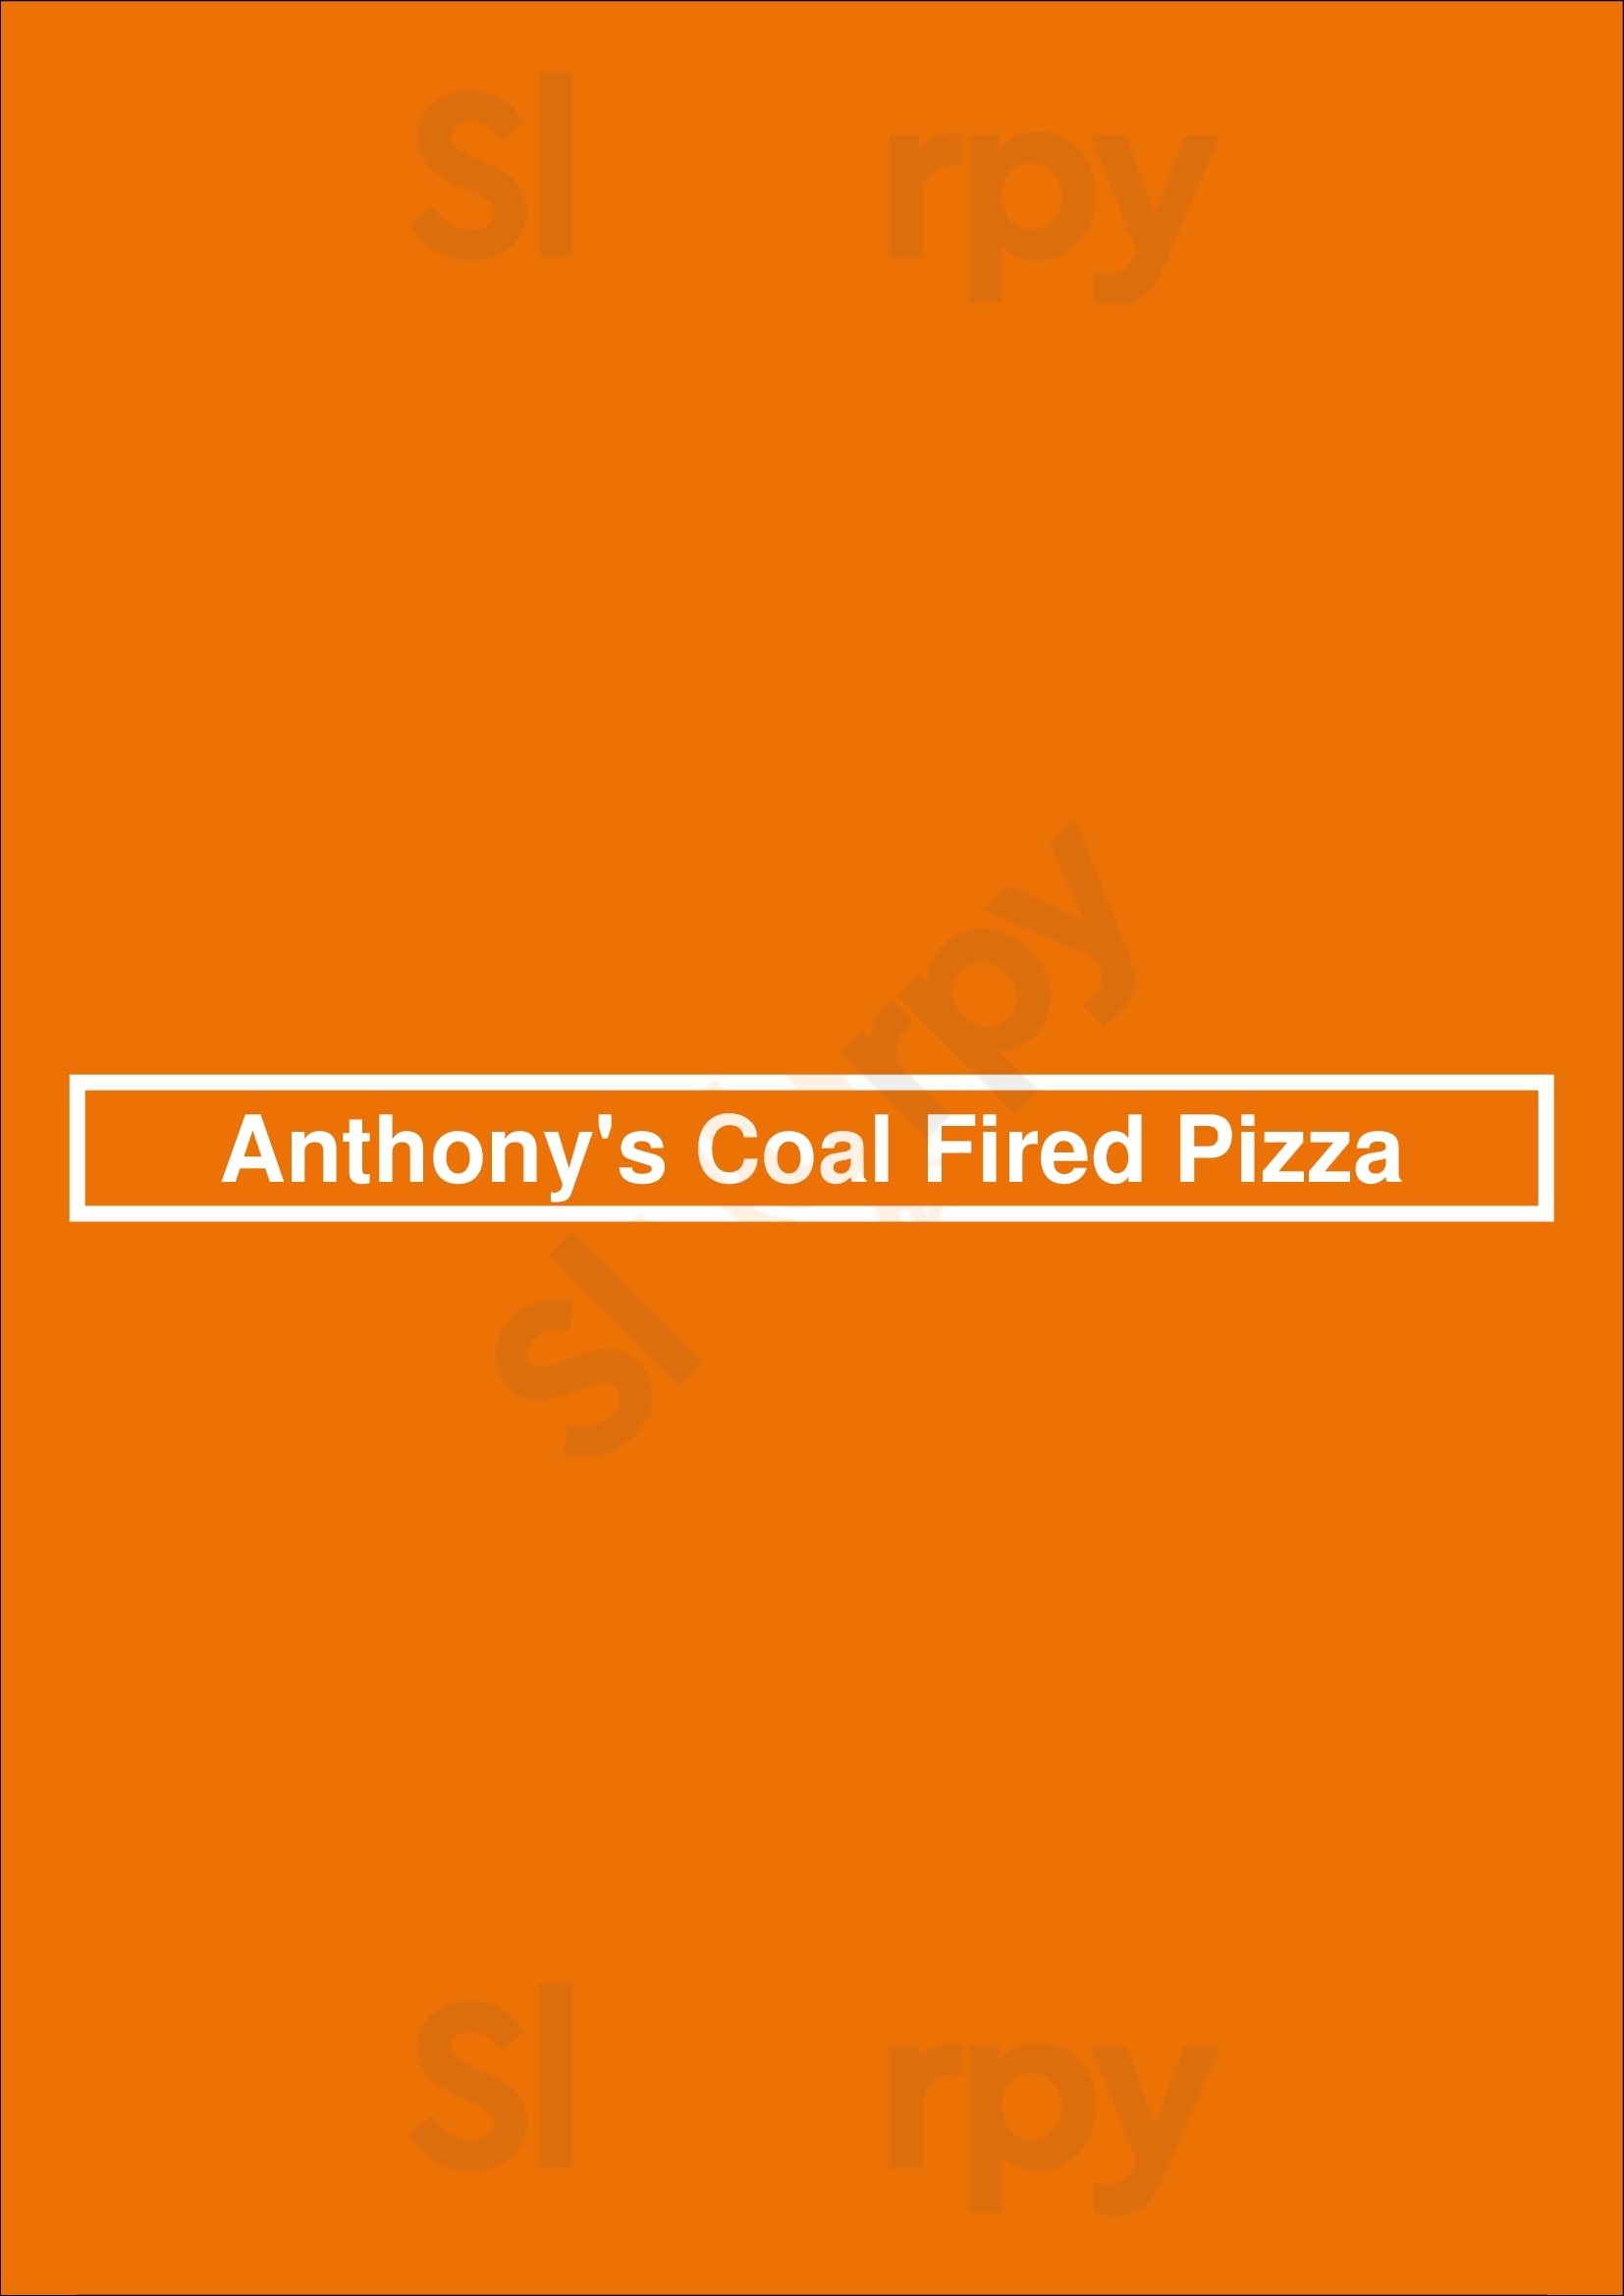 Anthony's Coal Fired Pizza Wilmington Menu - 1